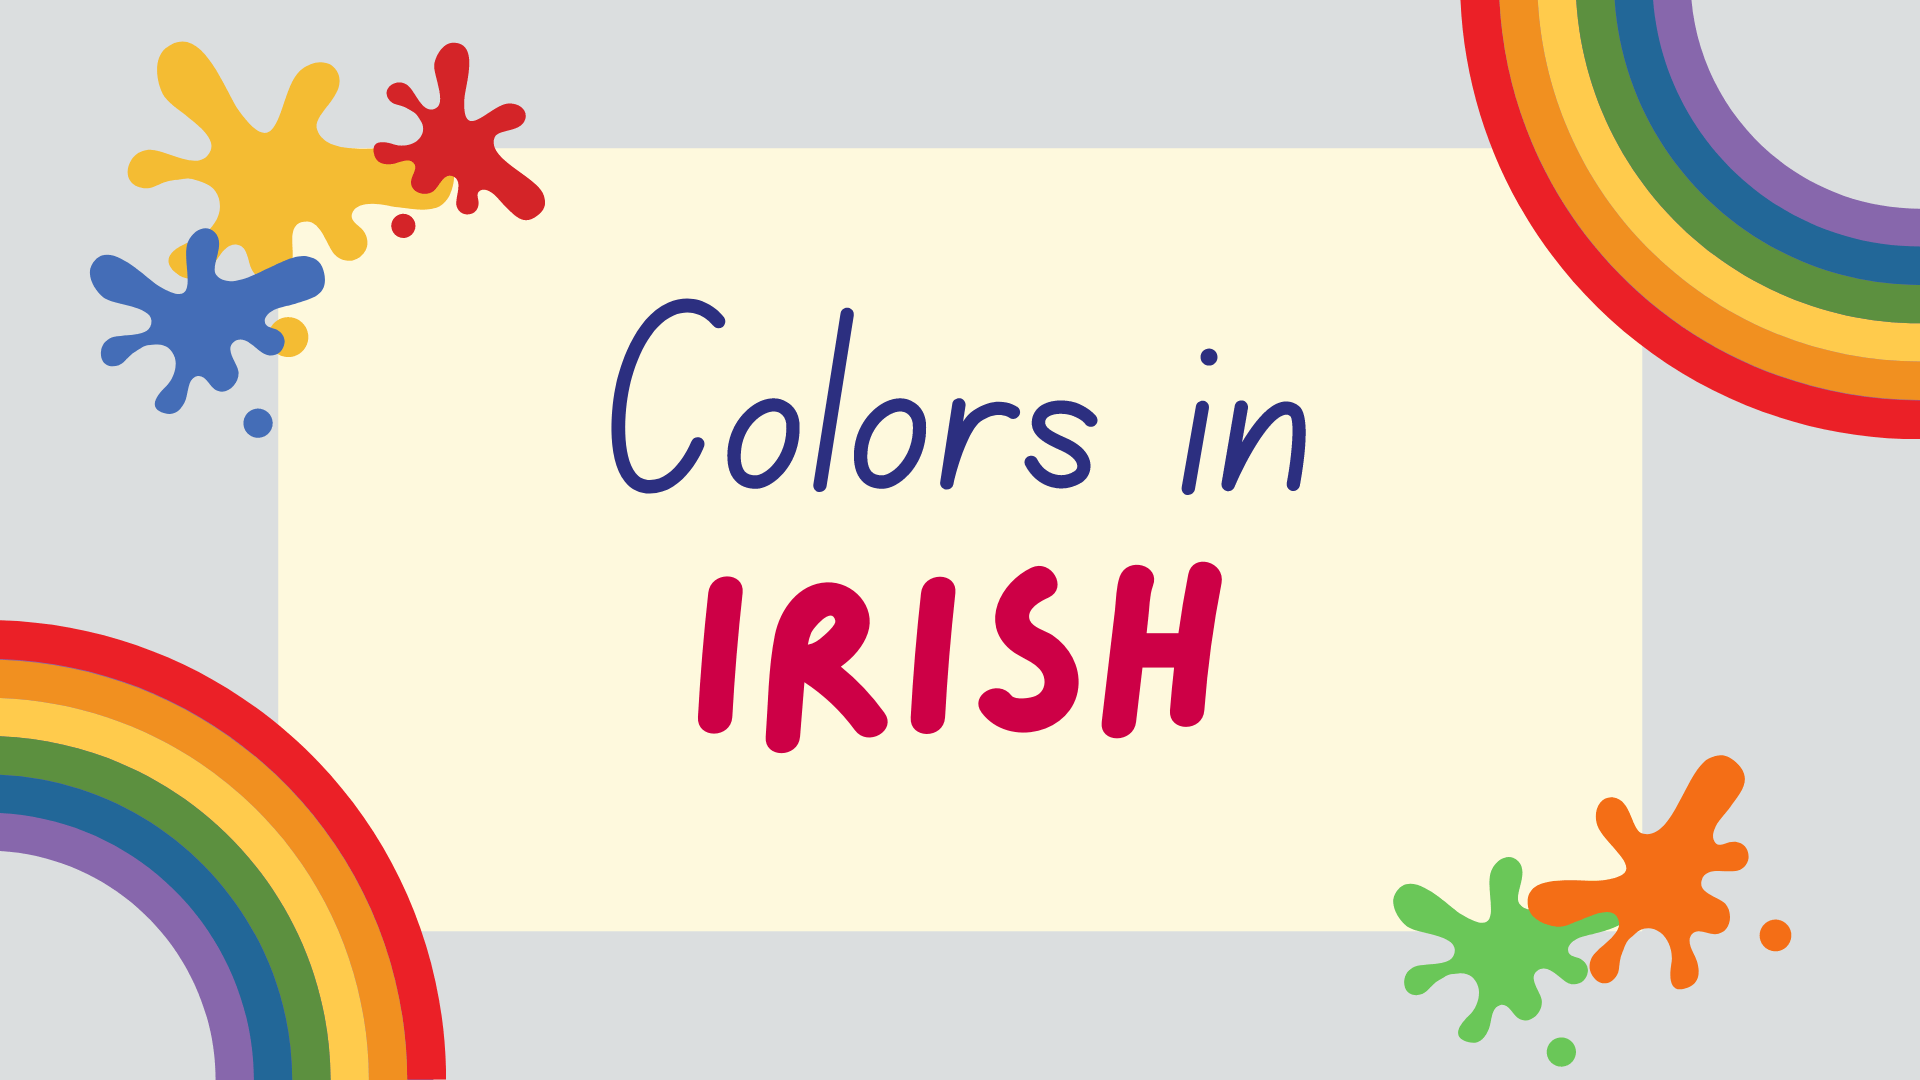 Colors In Irish - How To Name And Pronounce The Colors - Lingalot